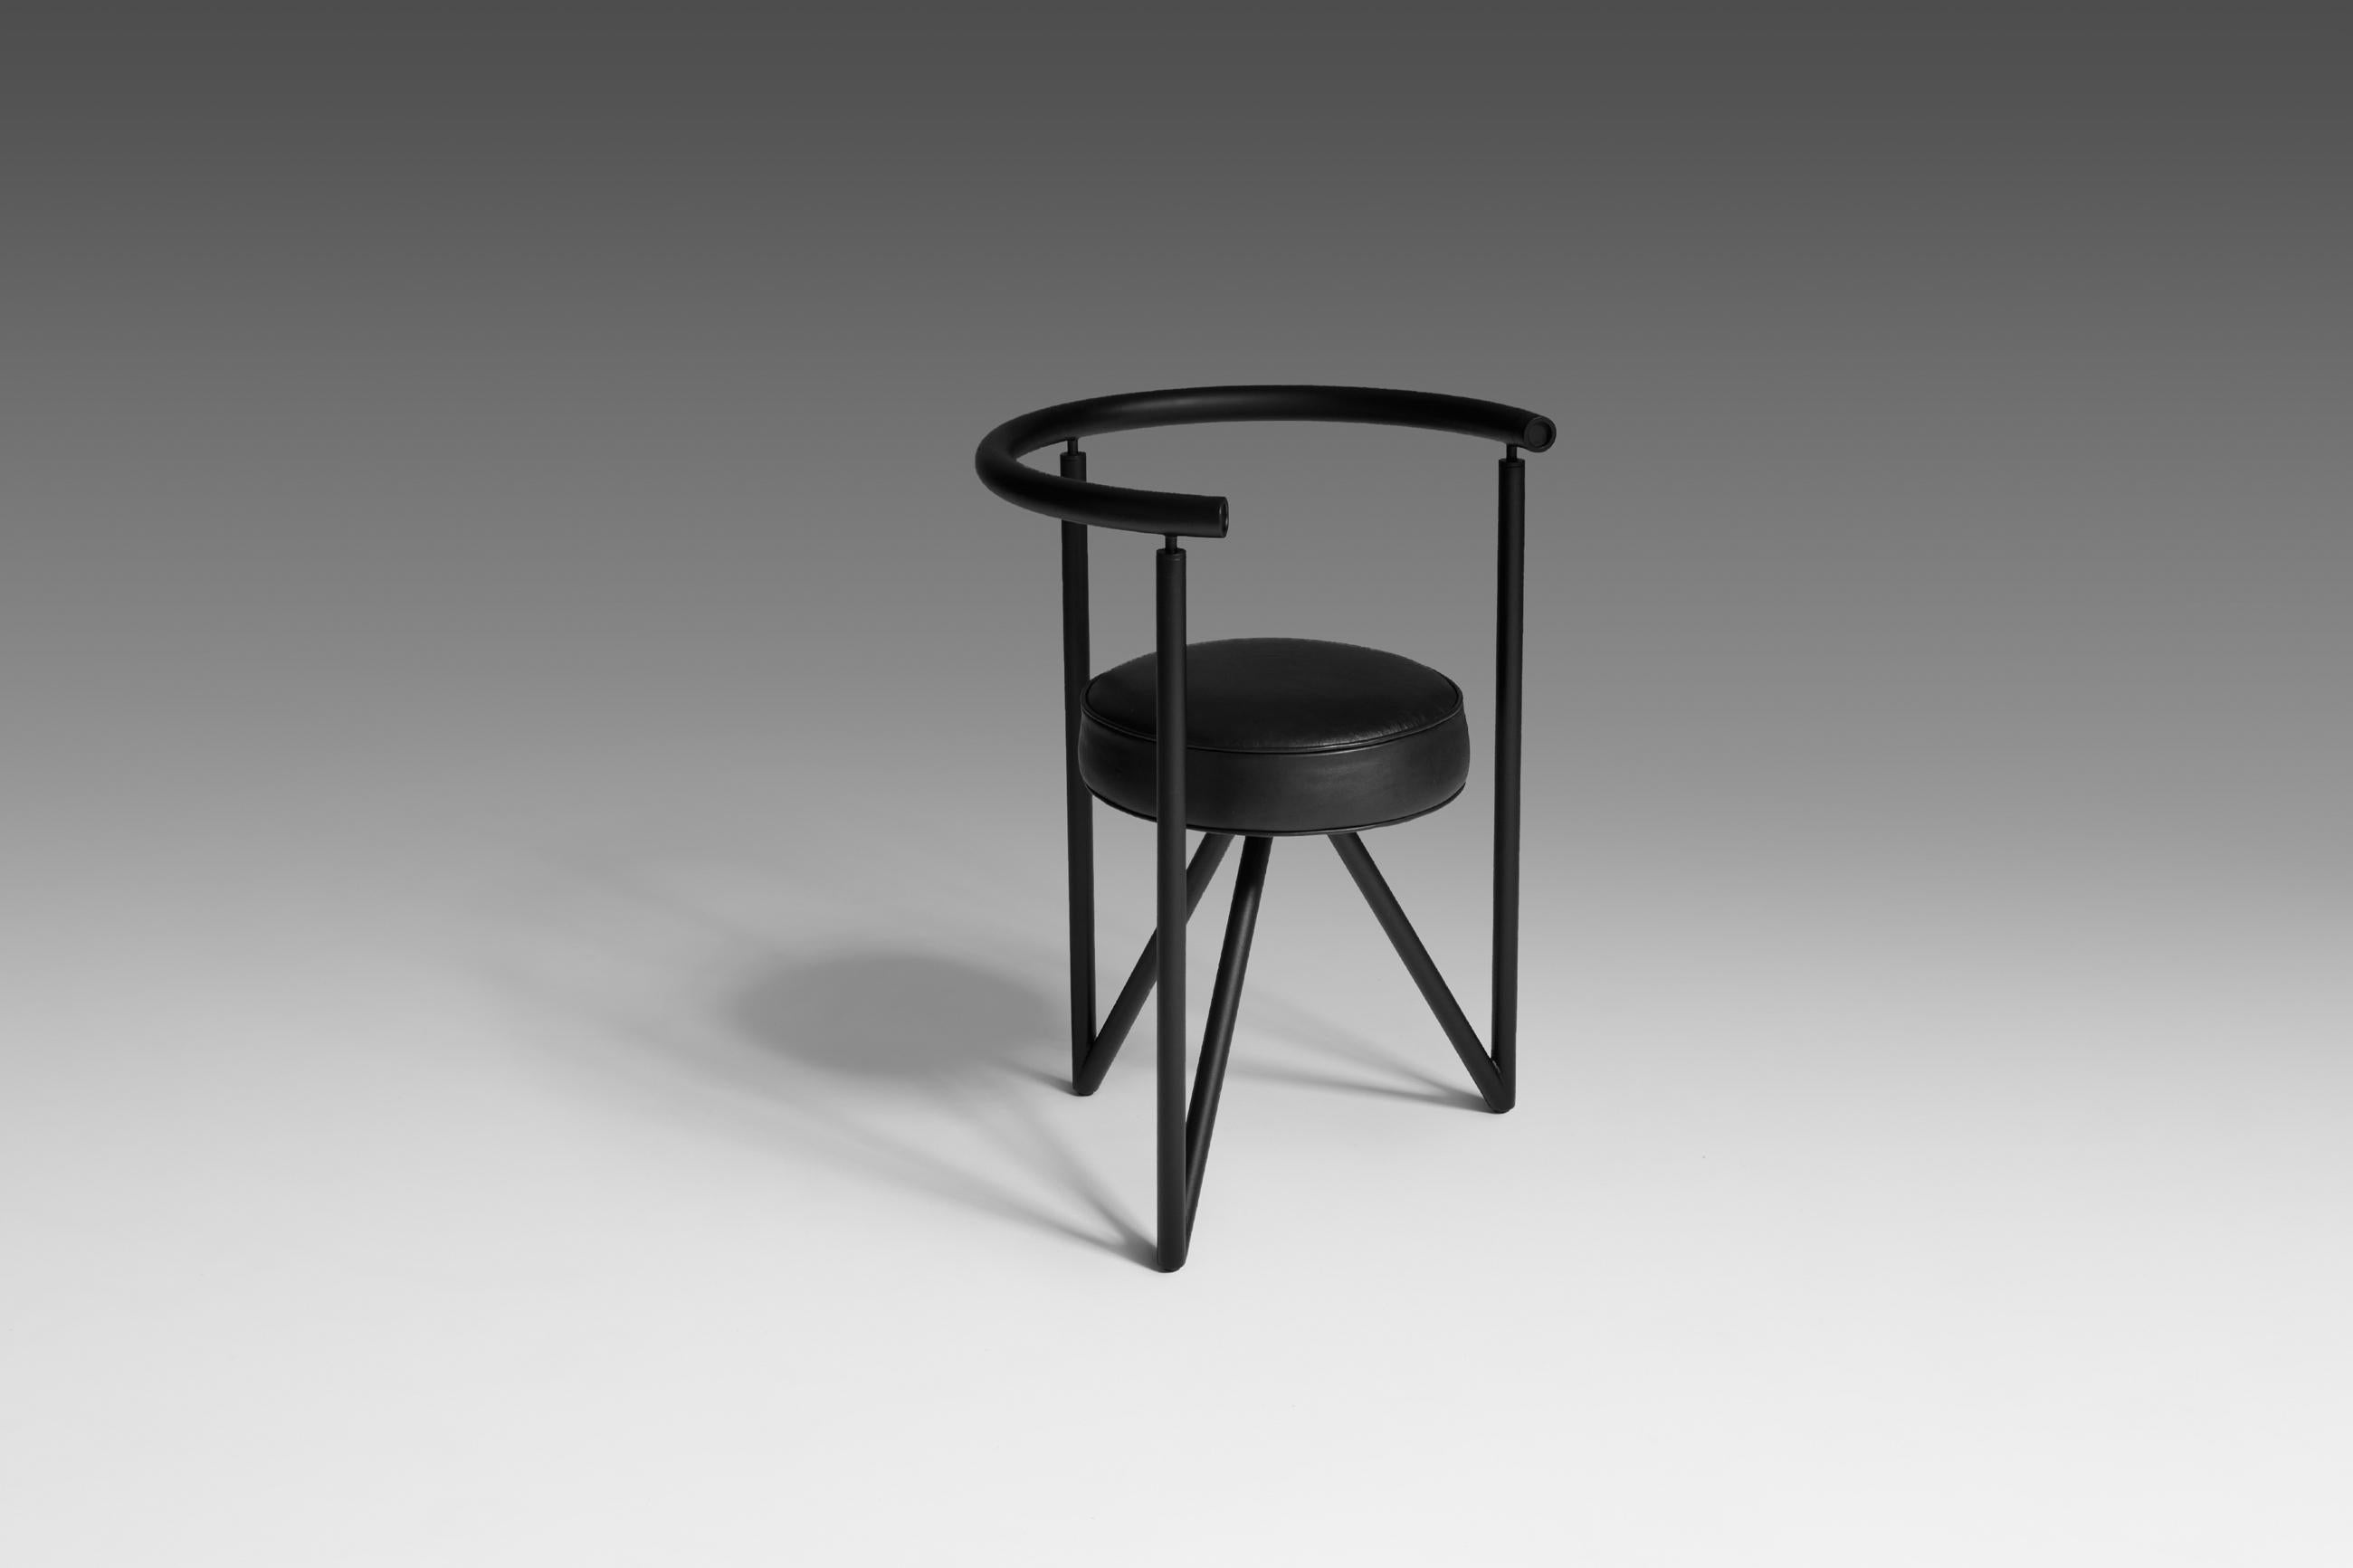 ‘Miss Dorn’ side chair by Philippe Starck for Disform, 1982. Constructed out of a black coated steel tubular frame and a round black leather seat. The primary shapes used for the design are giving the chair an interesting and sculptural appearance.